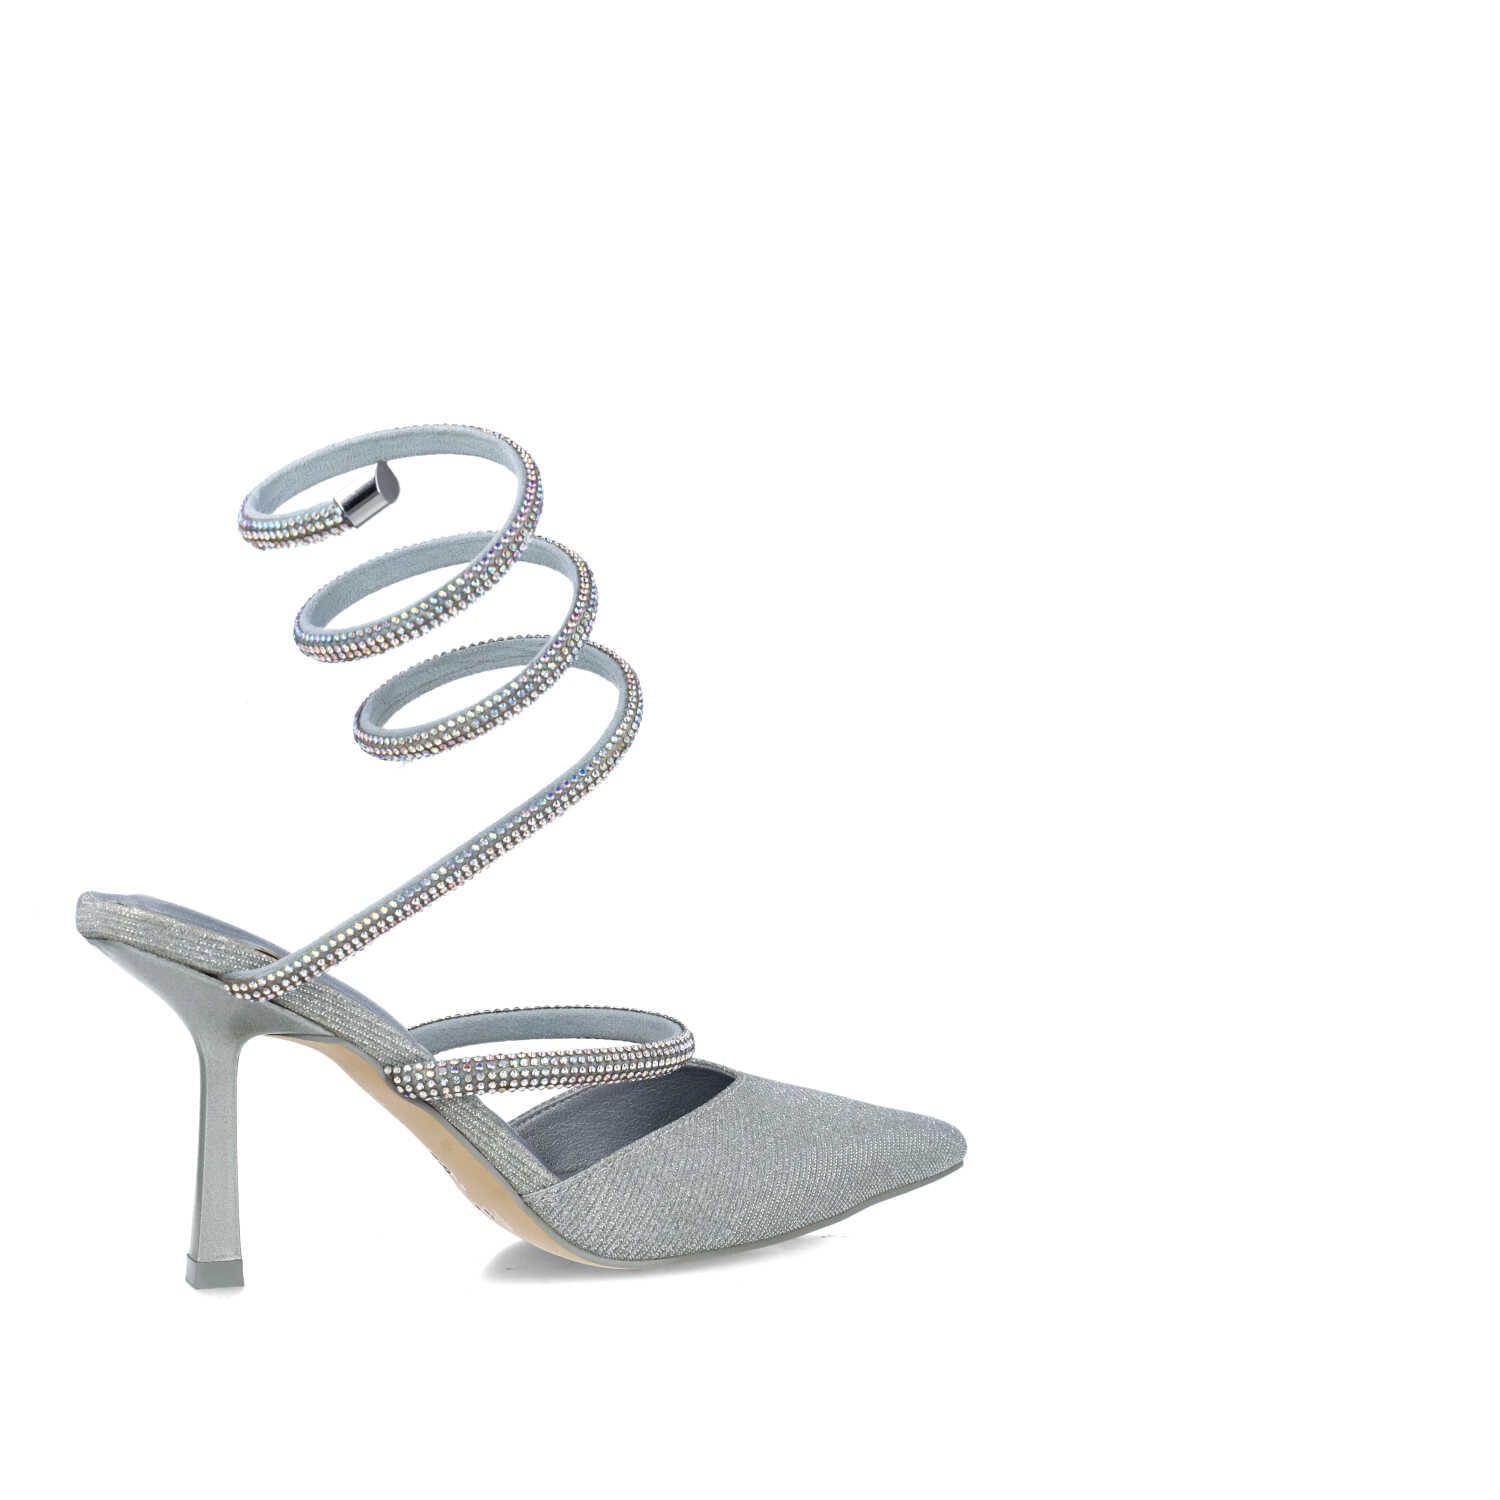 Silver Pumps With Wrap Around Strap_24716_09_03